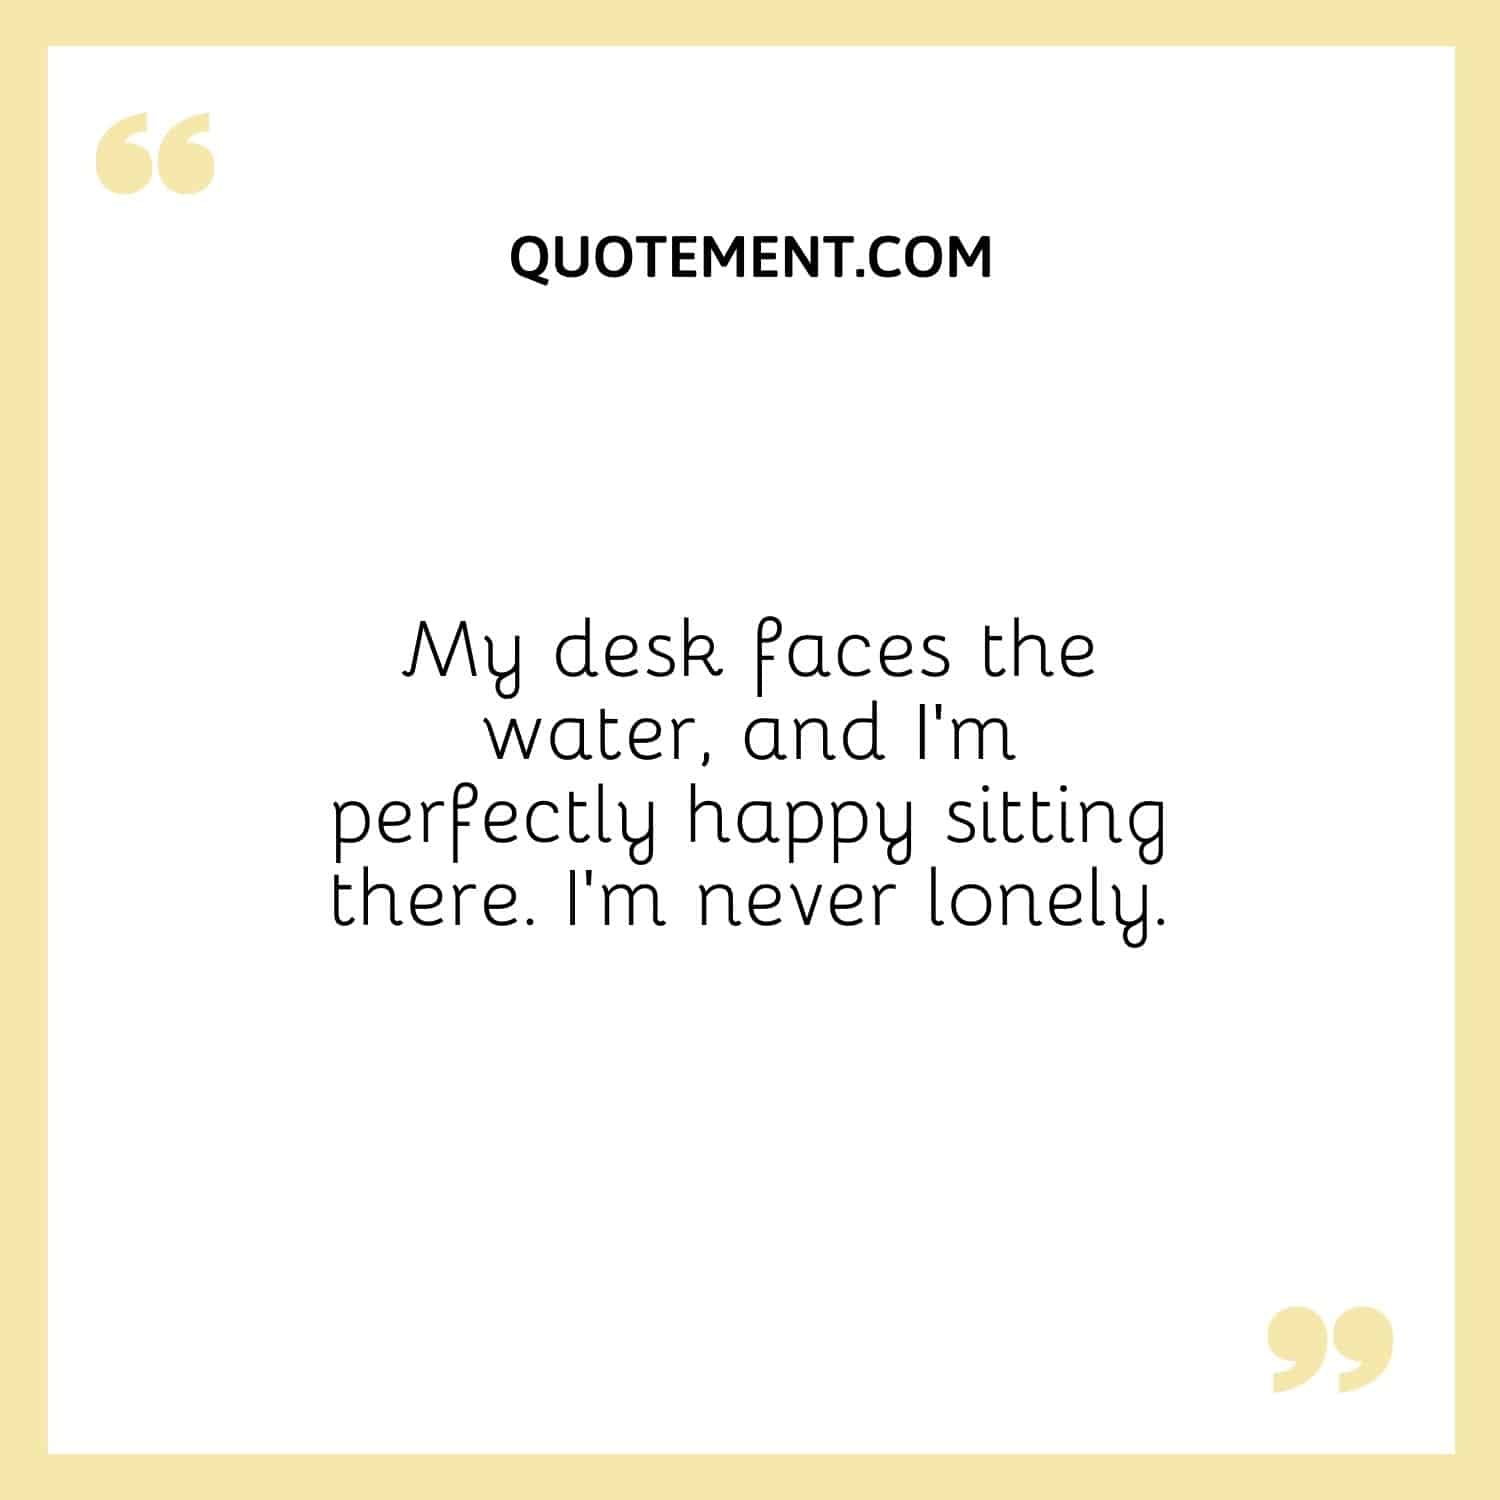 My desk faces the water, and I’m perfectly happy sitting there.